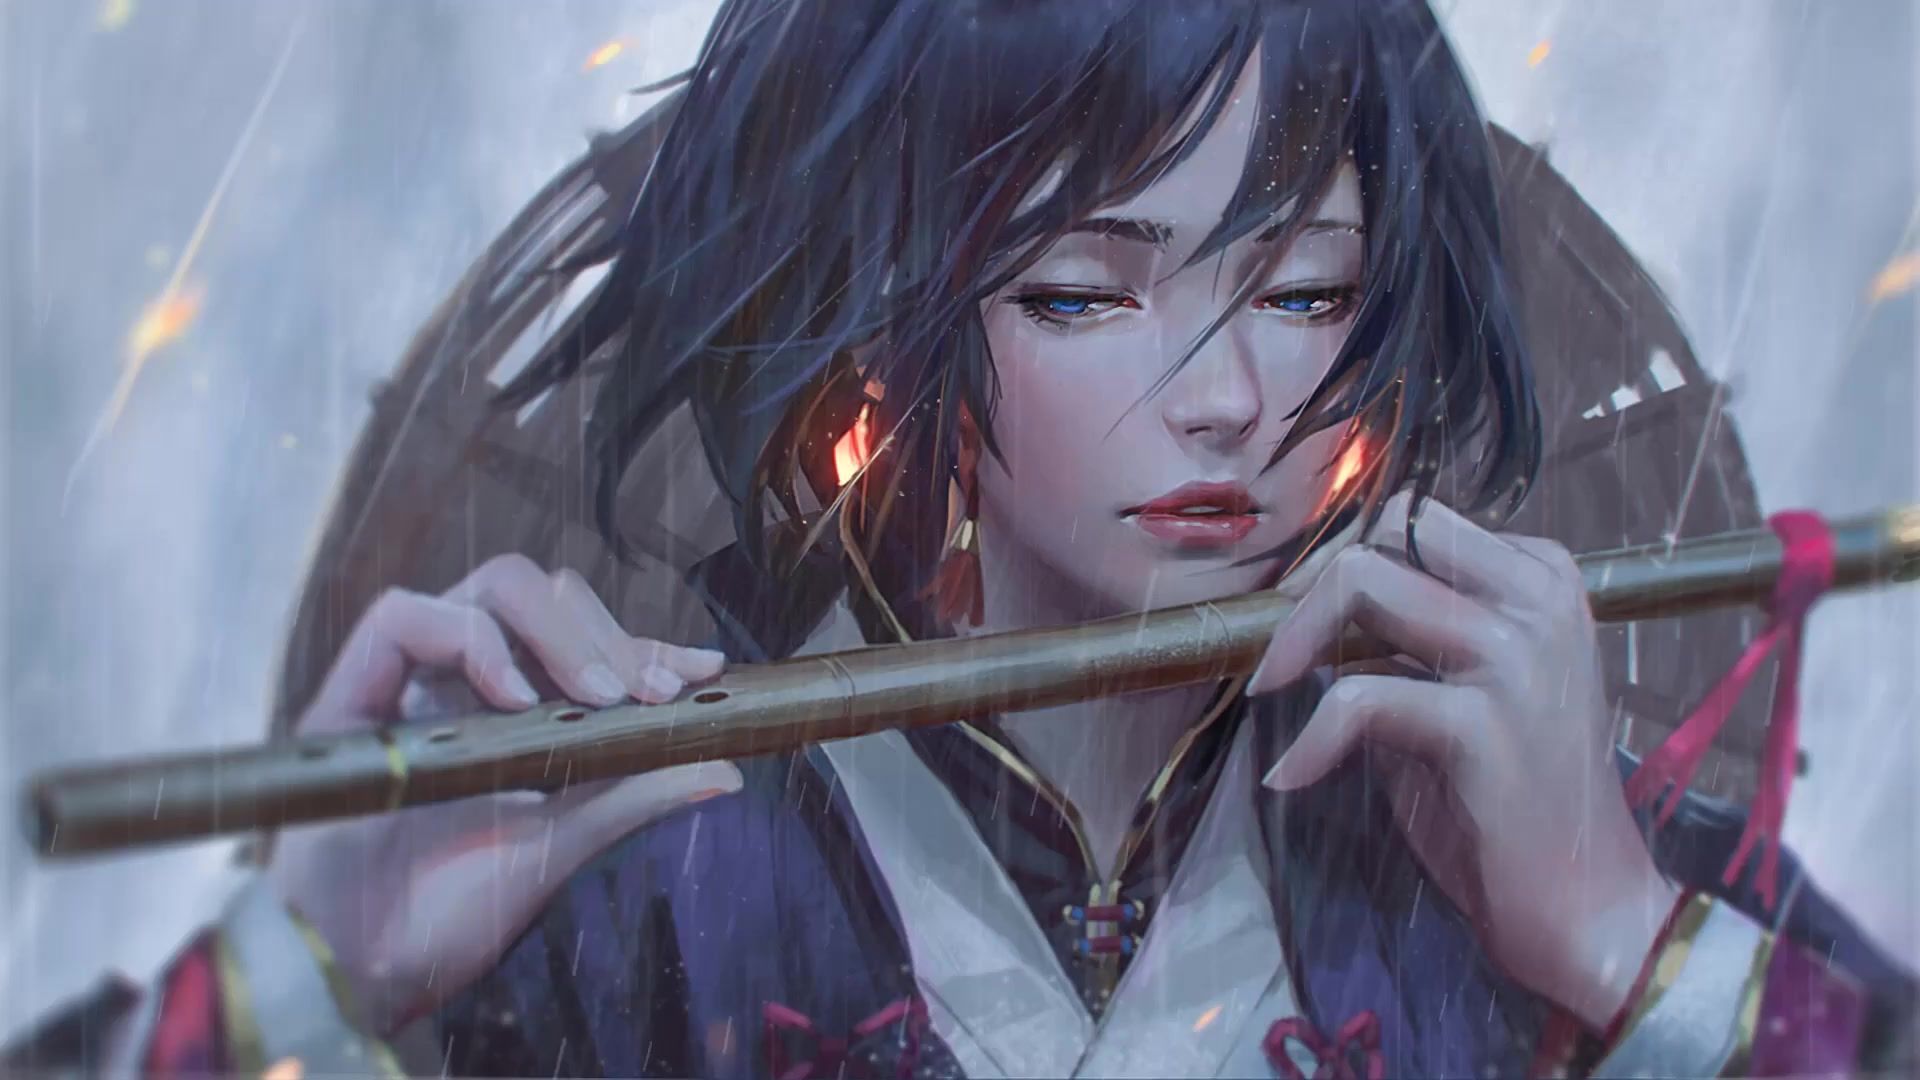 Girl With Flute In Rain Anime Live Wallpaper Free